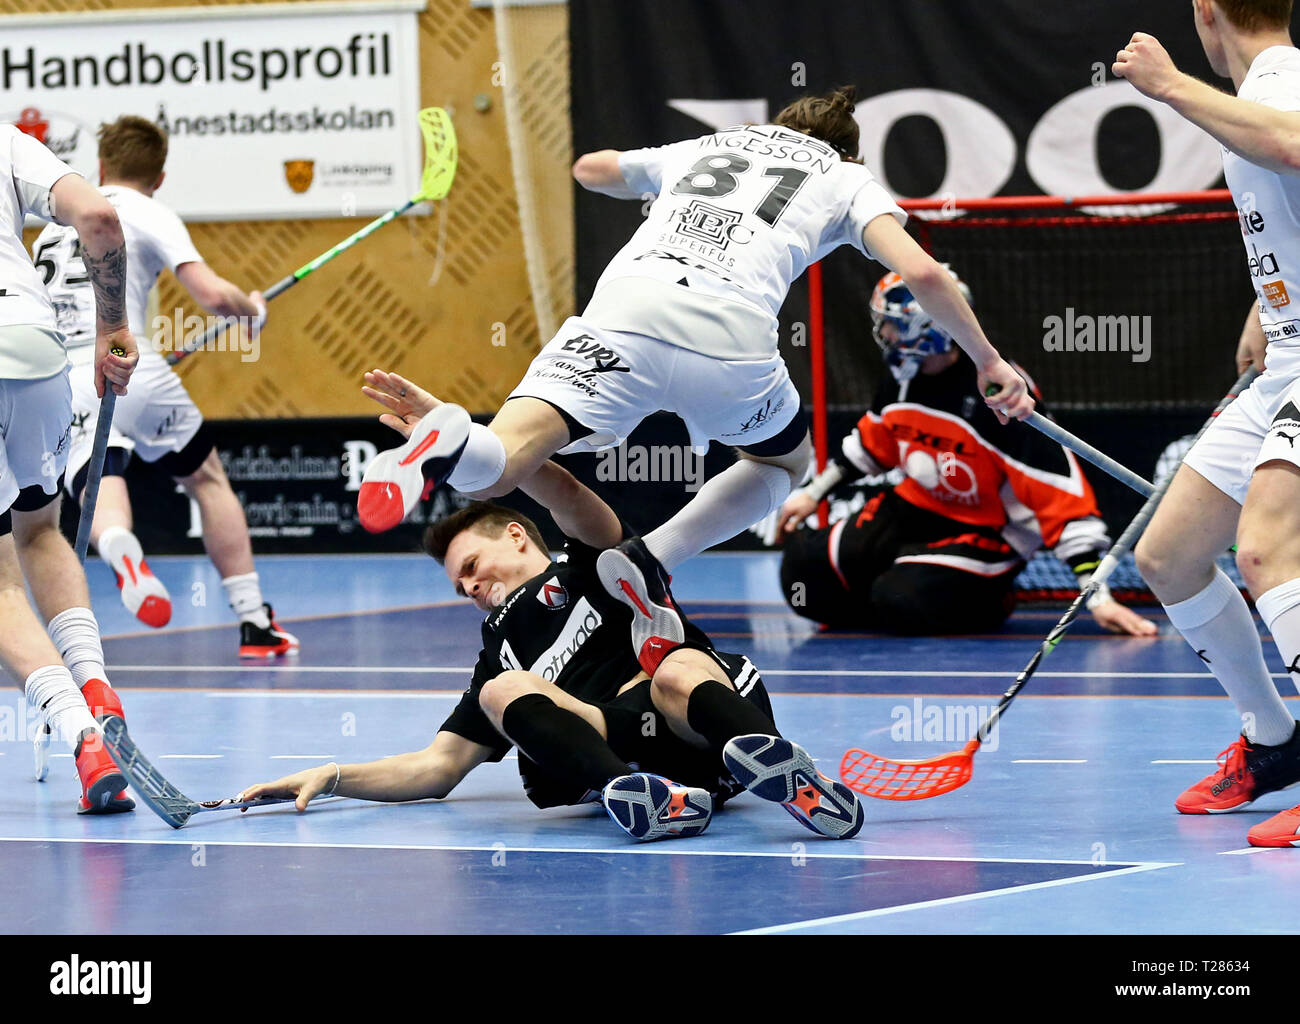 Innebandy High Resolution Stock Photography and Images - Alamy